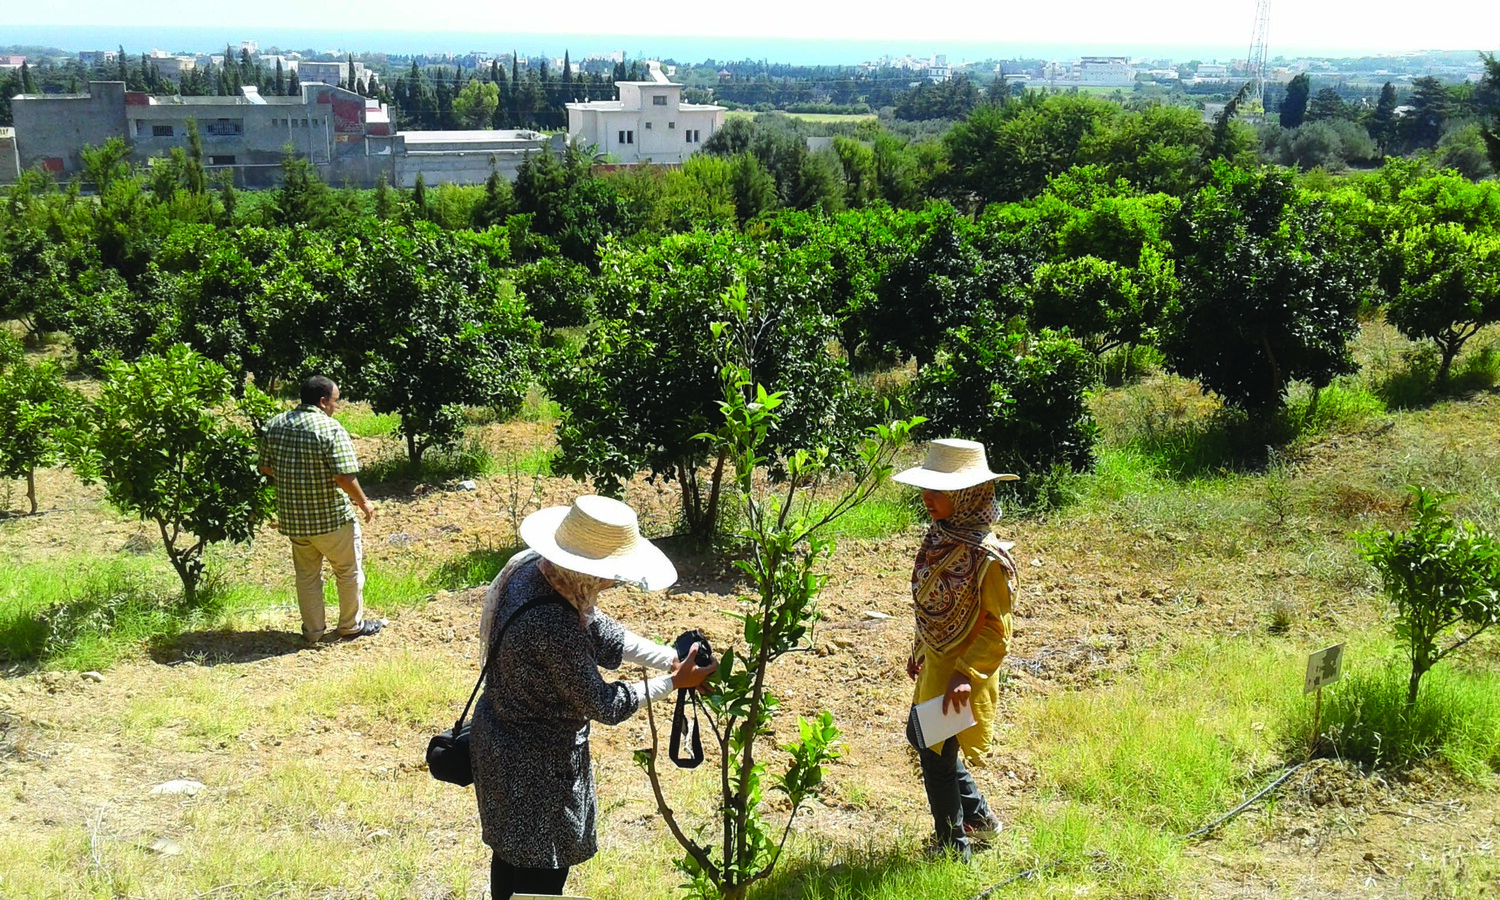 Former ECHO intern, Kimberly Duncan assesses fruit trees with colleagues in North Africa where she works for an agricultural organization.